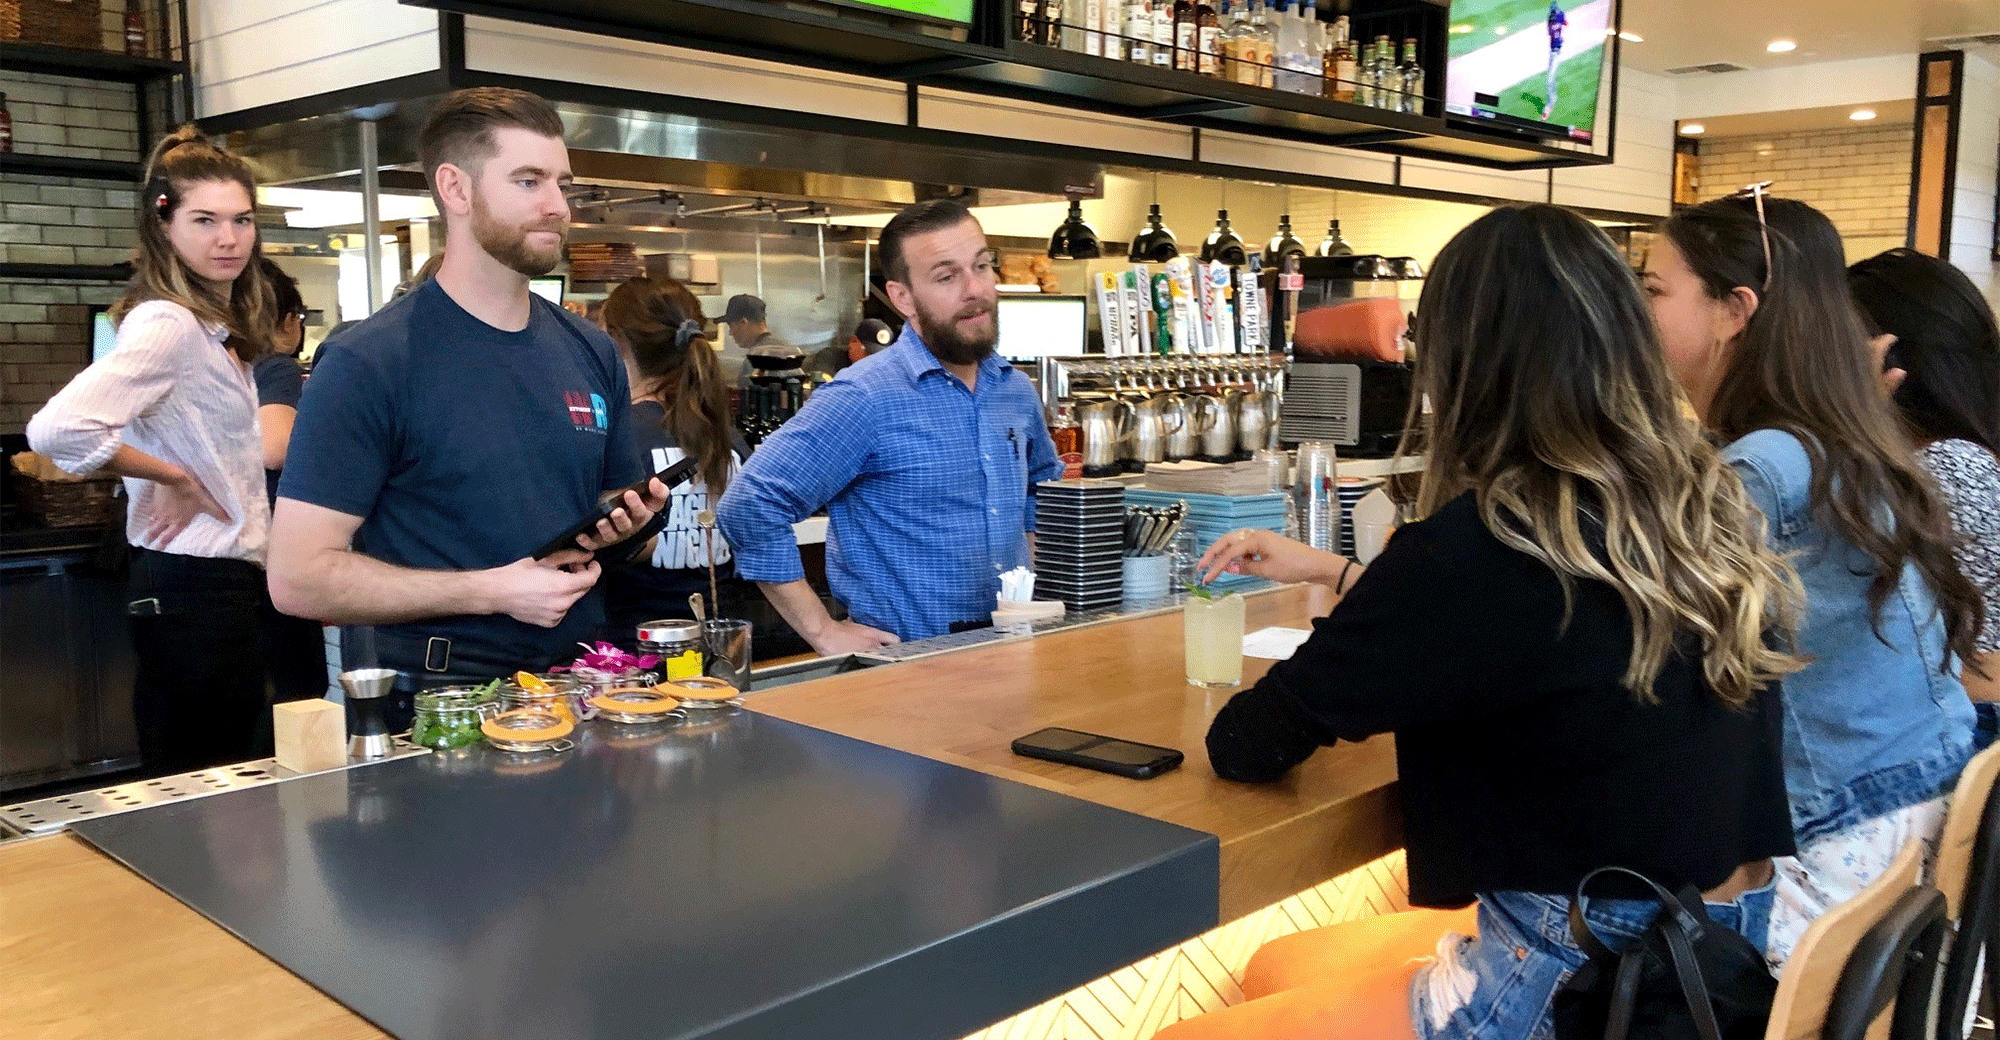 WR Kitchen debuts in California with fast-casual bar format | Nation's